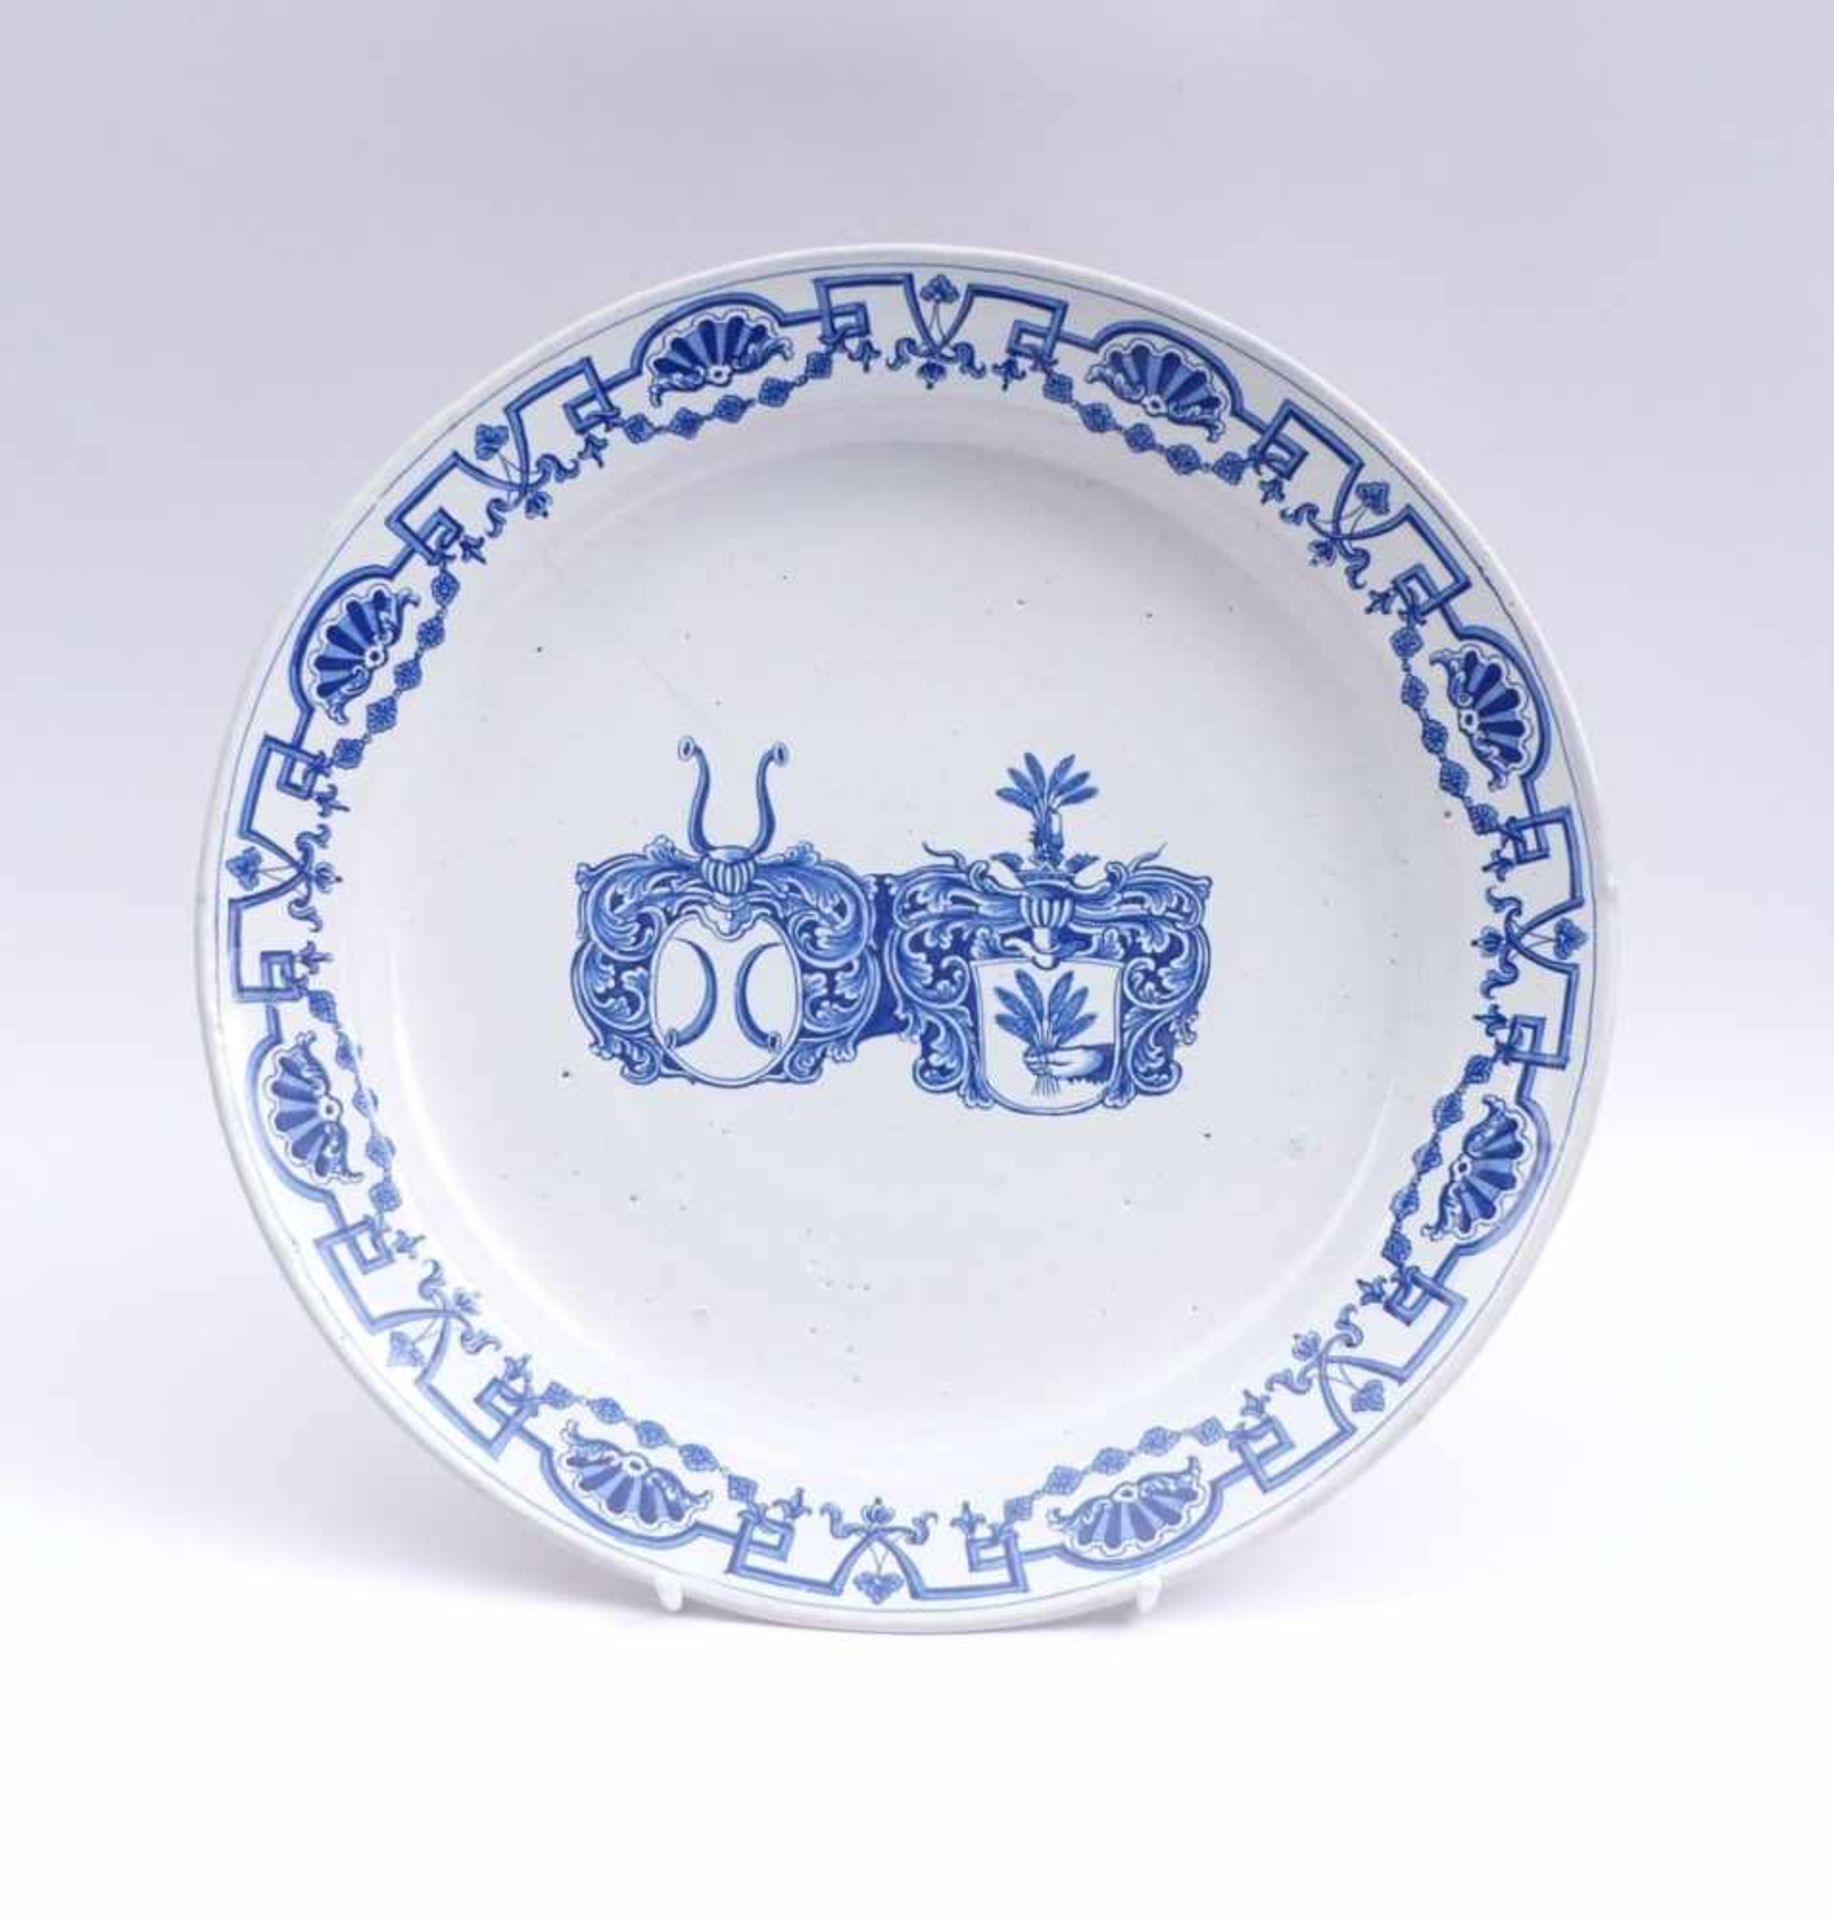 Large plate with alliance crest